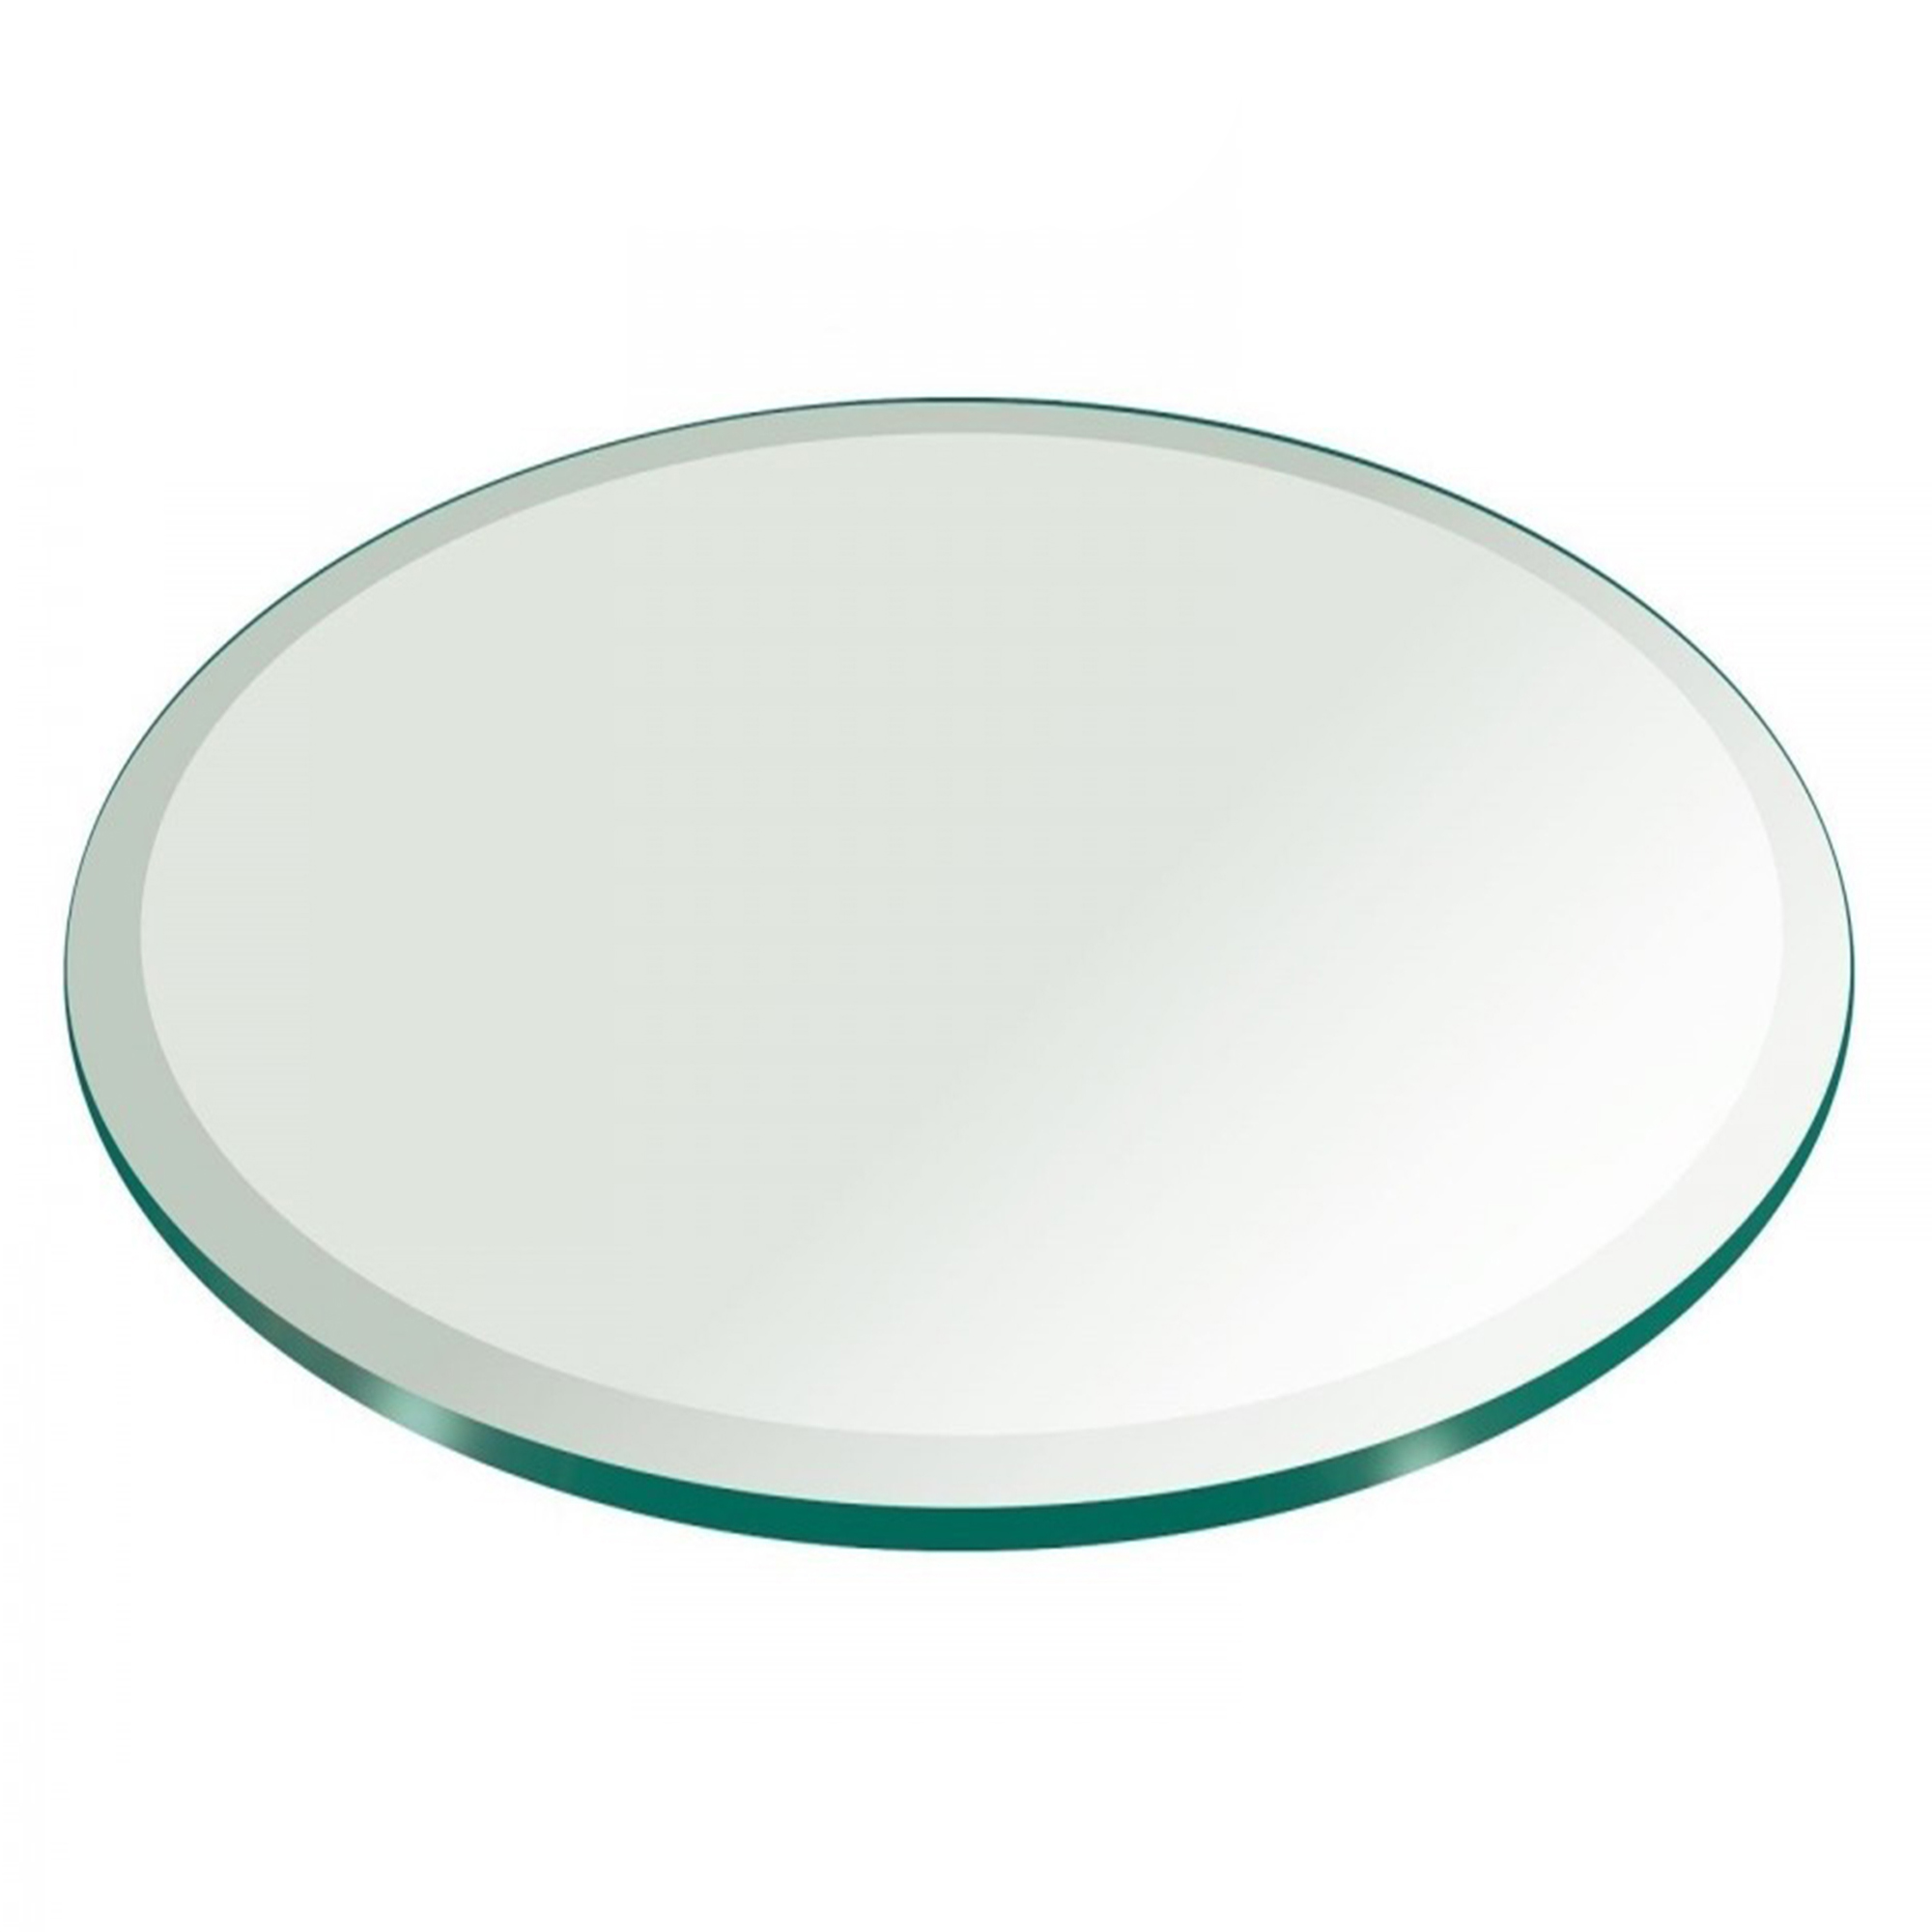 Glass Table Top 72 Inch Round 1 2 Inch Thick Beveled Tempered